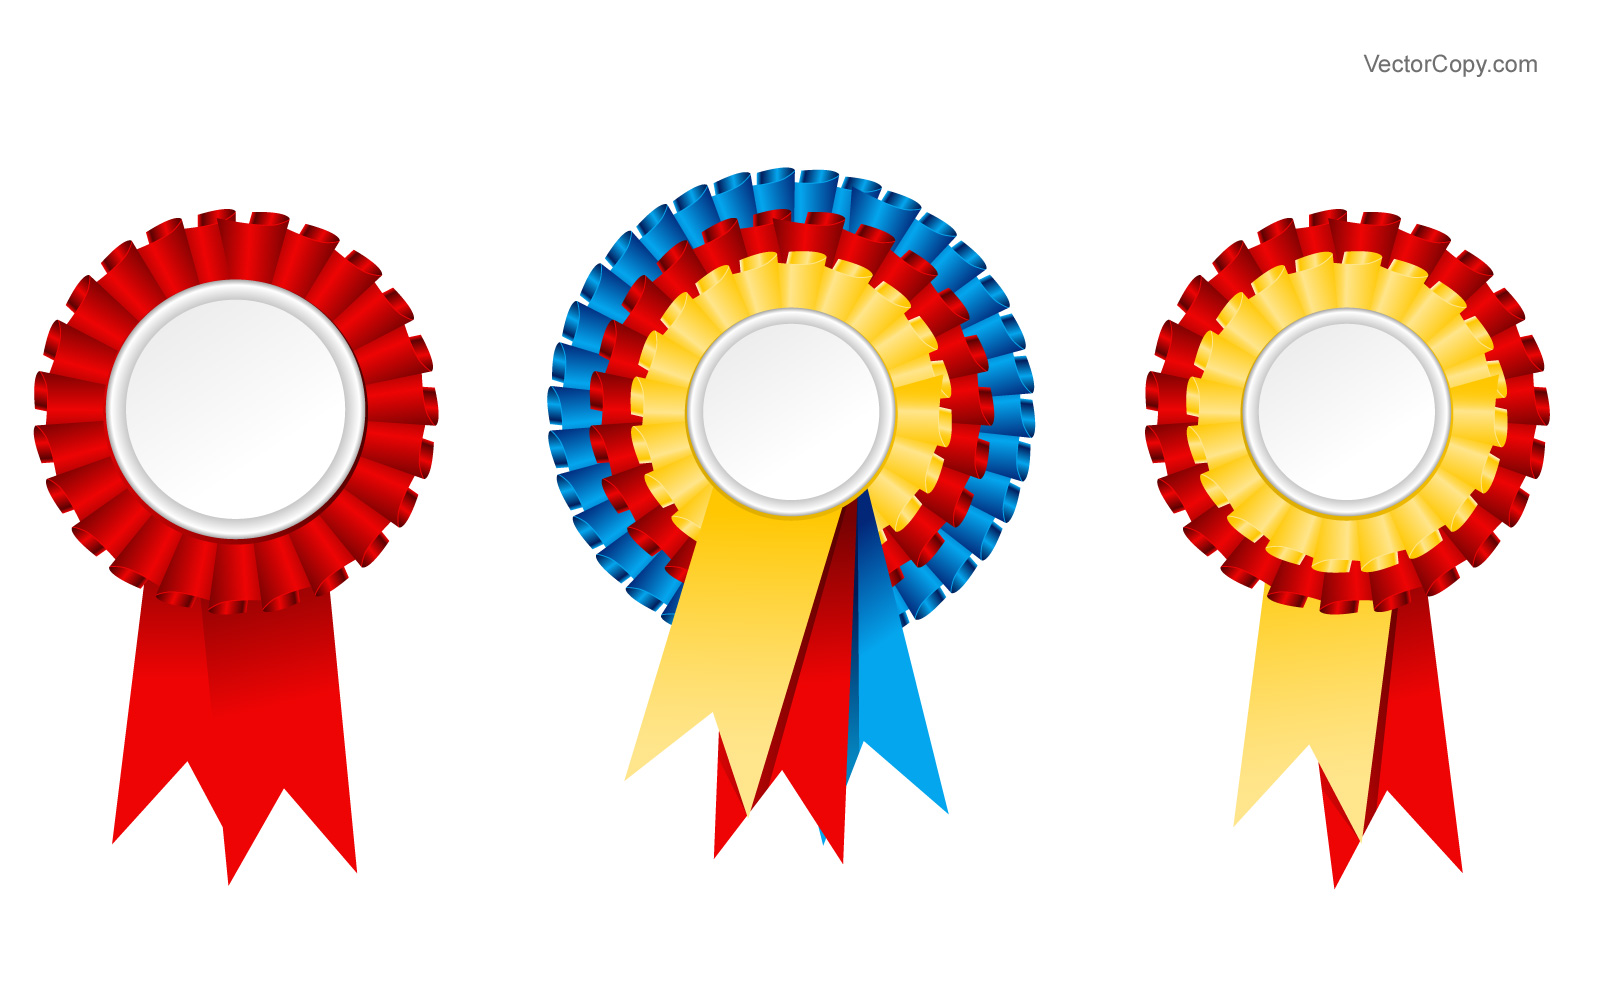 Rosettes and ribbons (awards) Free Vector Image #33 – VectorCopy